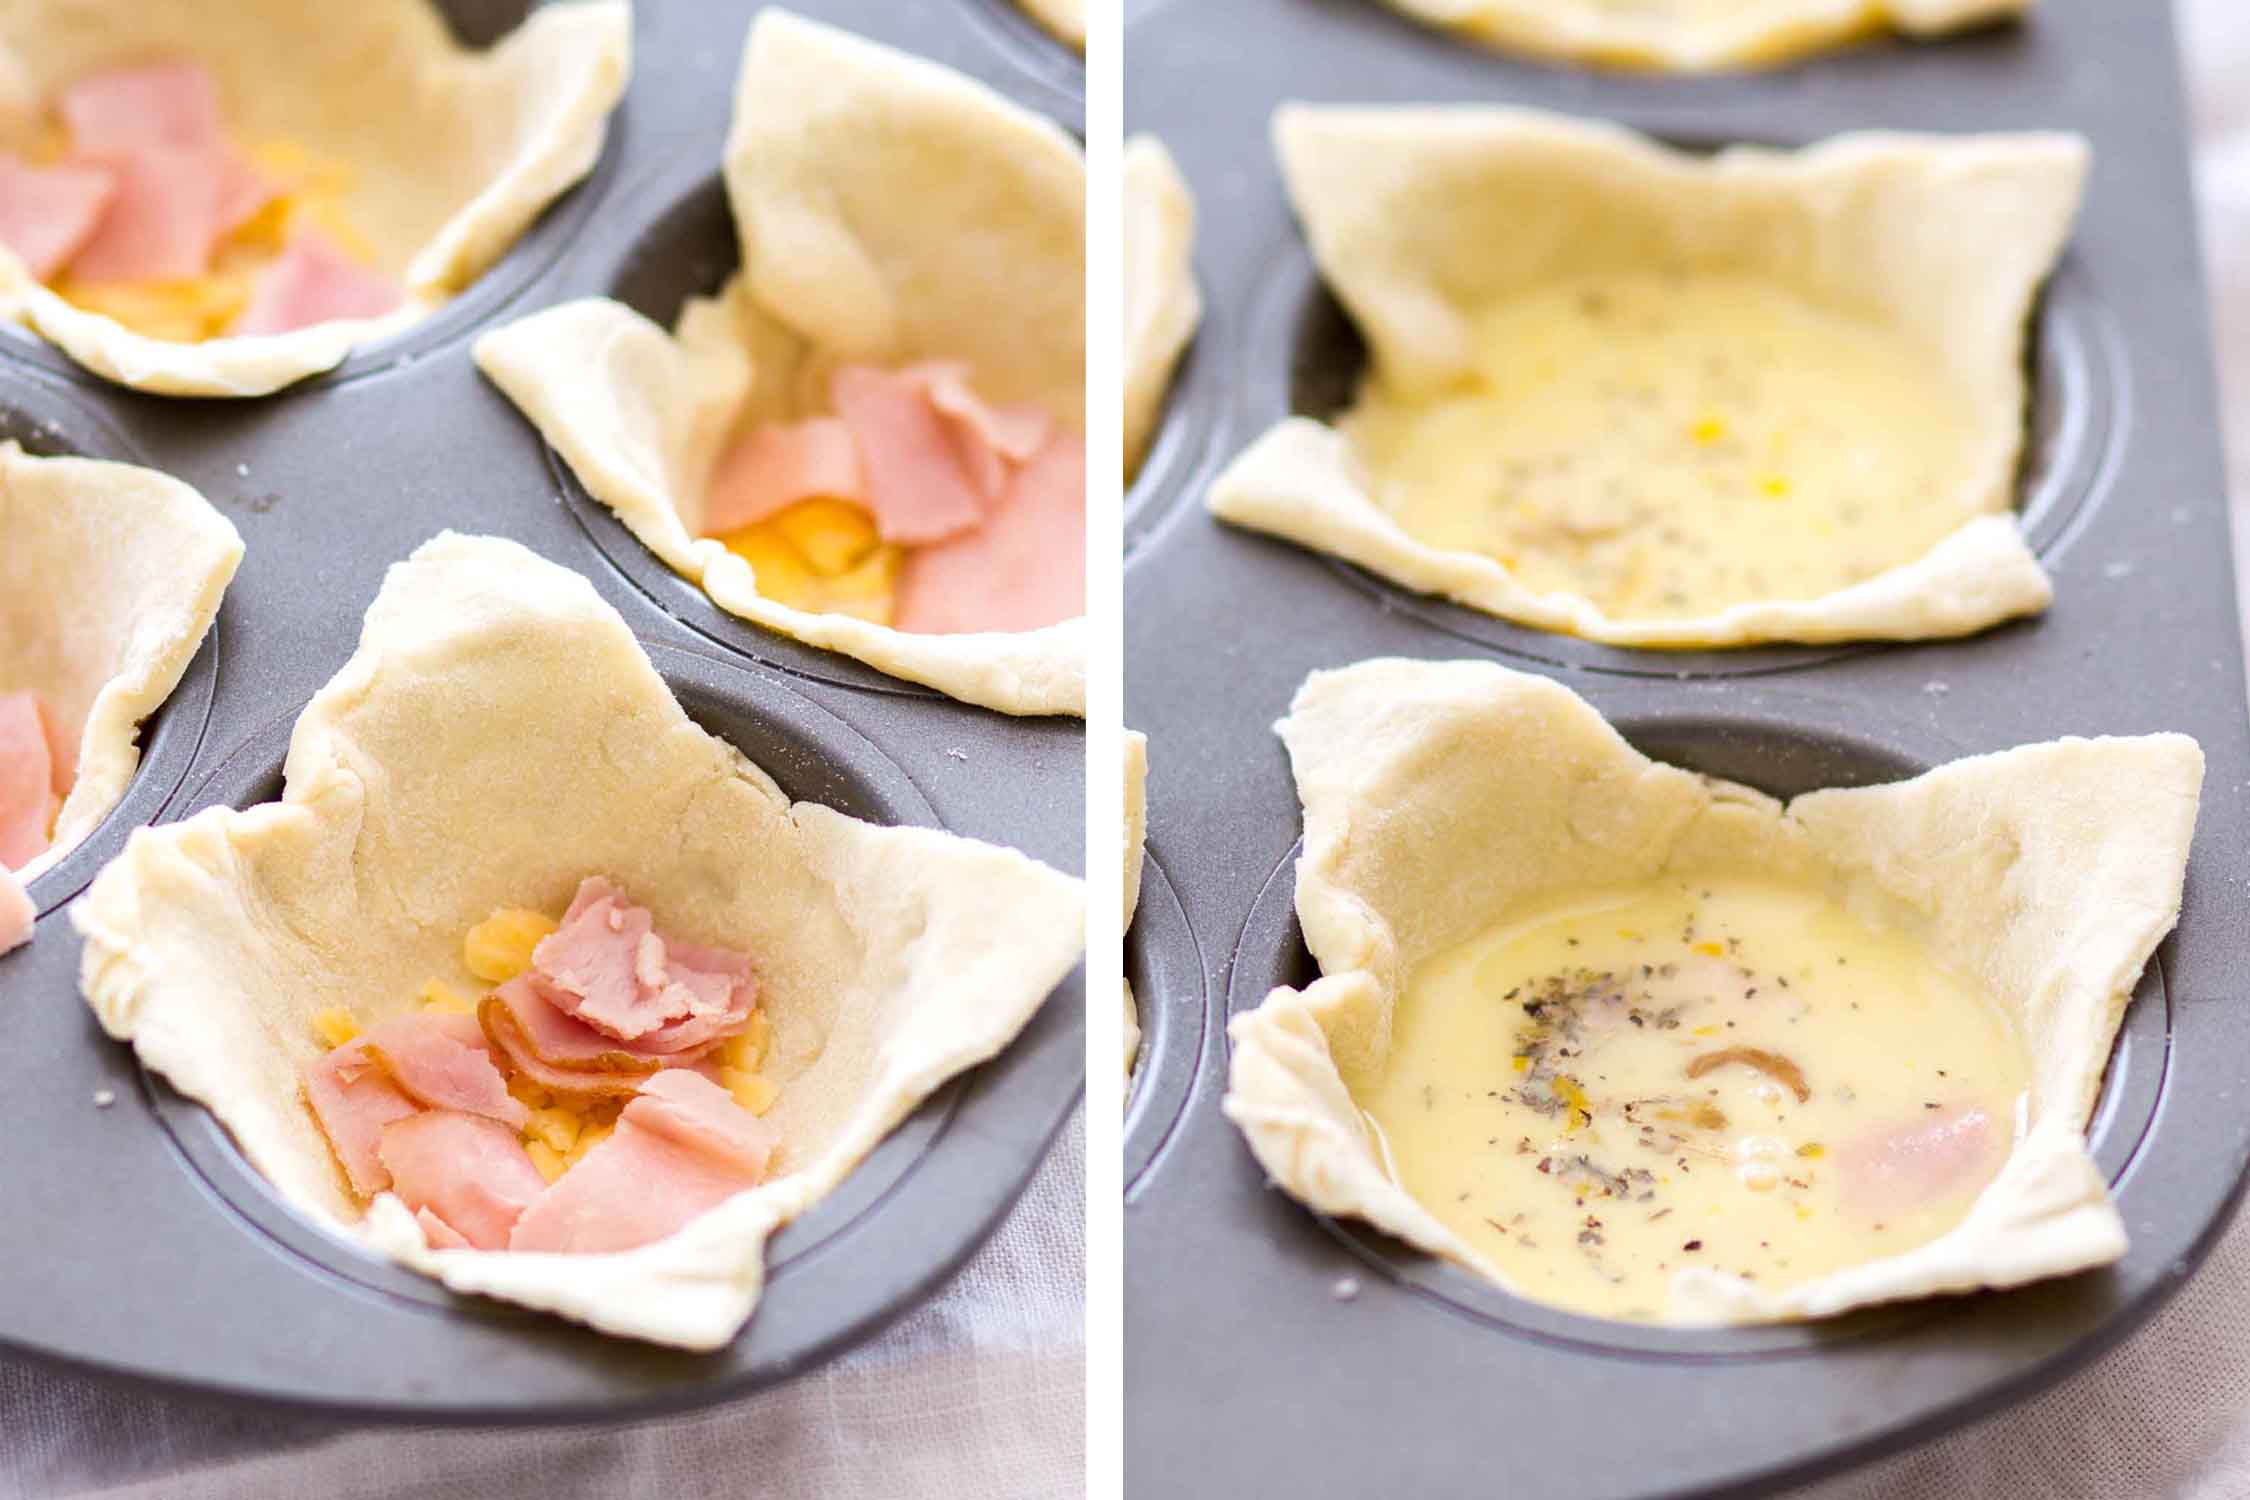 Two photos, on the left uncooked pastry in a muffin tin with ham and cheese in them and on the right uncooked pastry in a muffin tin filled with egg